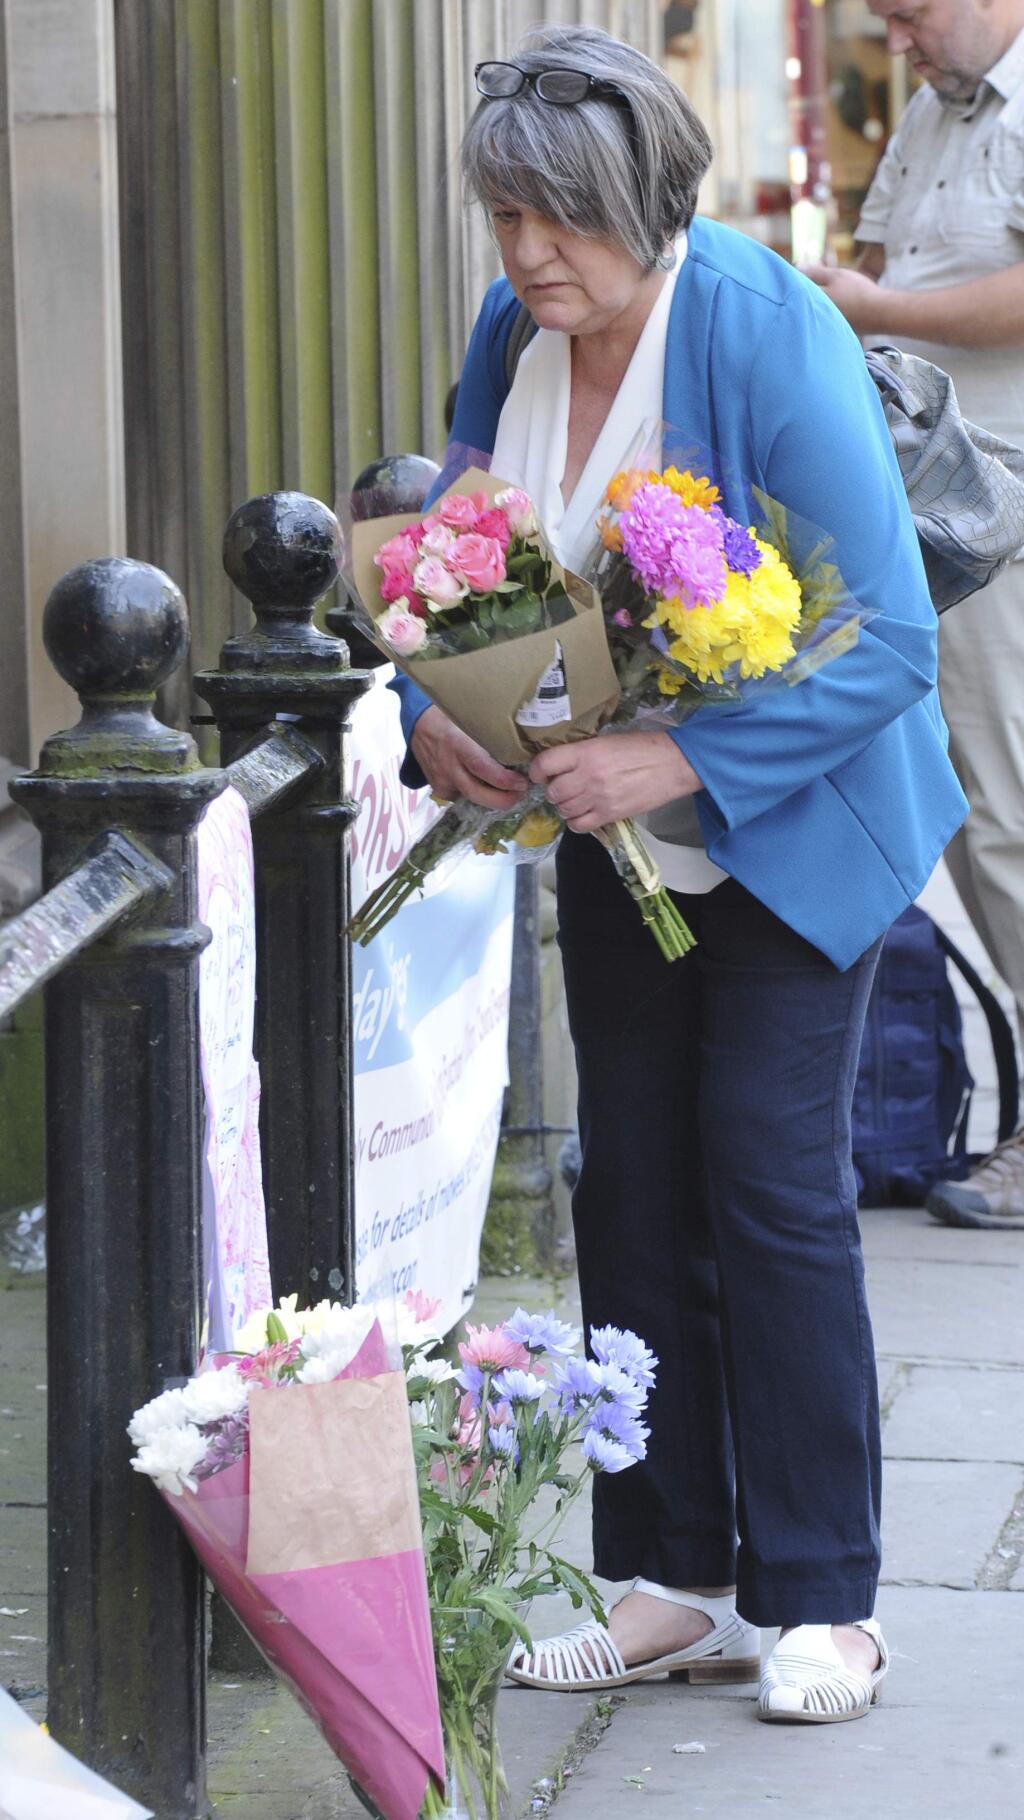 An unidentified member of the public places a floral tribute at St Ann's square, Manchester, England Tuesday May 23, 2017. The Islamic State group claimed responsibility Tuesday for the suicide attack at an Ariana Grande show that left more than 20 people dead as young concertgoers fled, some still wearing the American pop star's trademark kitten ears and holding pink balloons. (AP Photo/Rui Vieira)